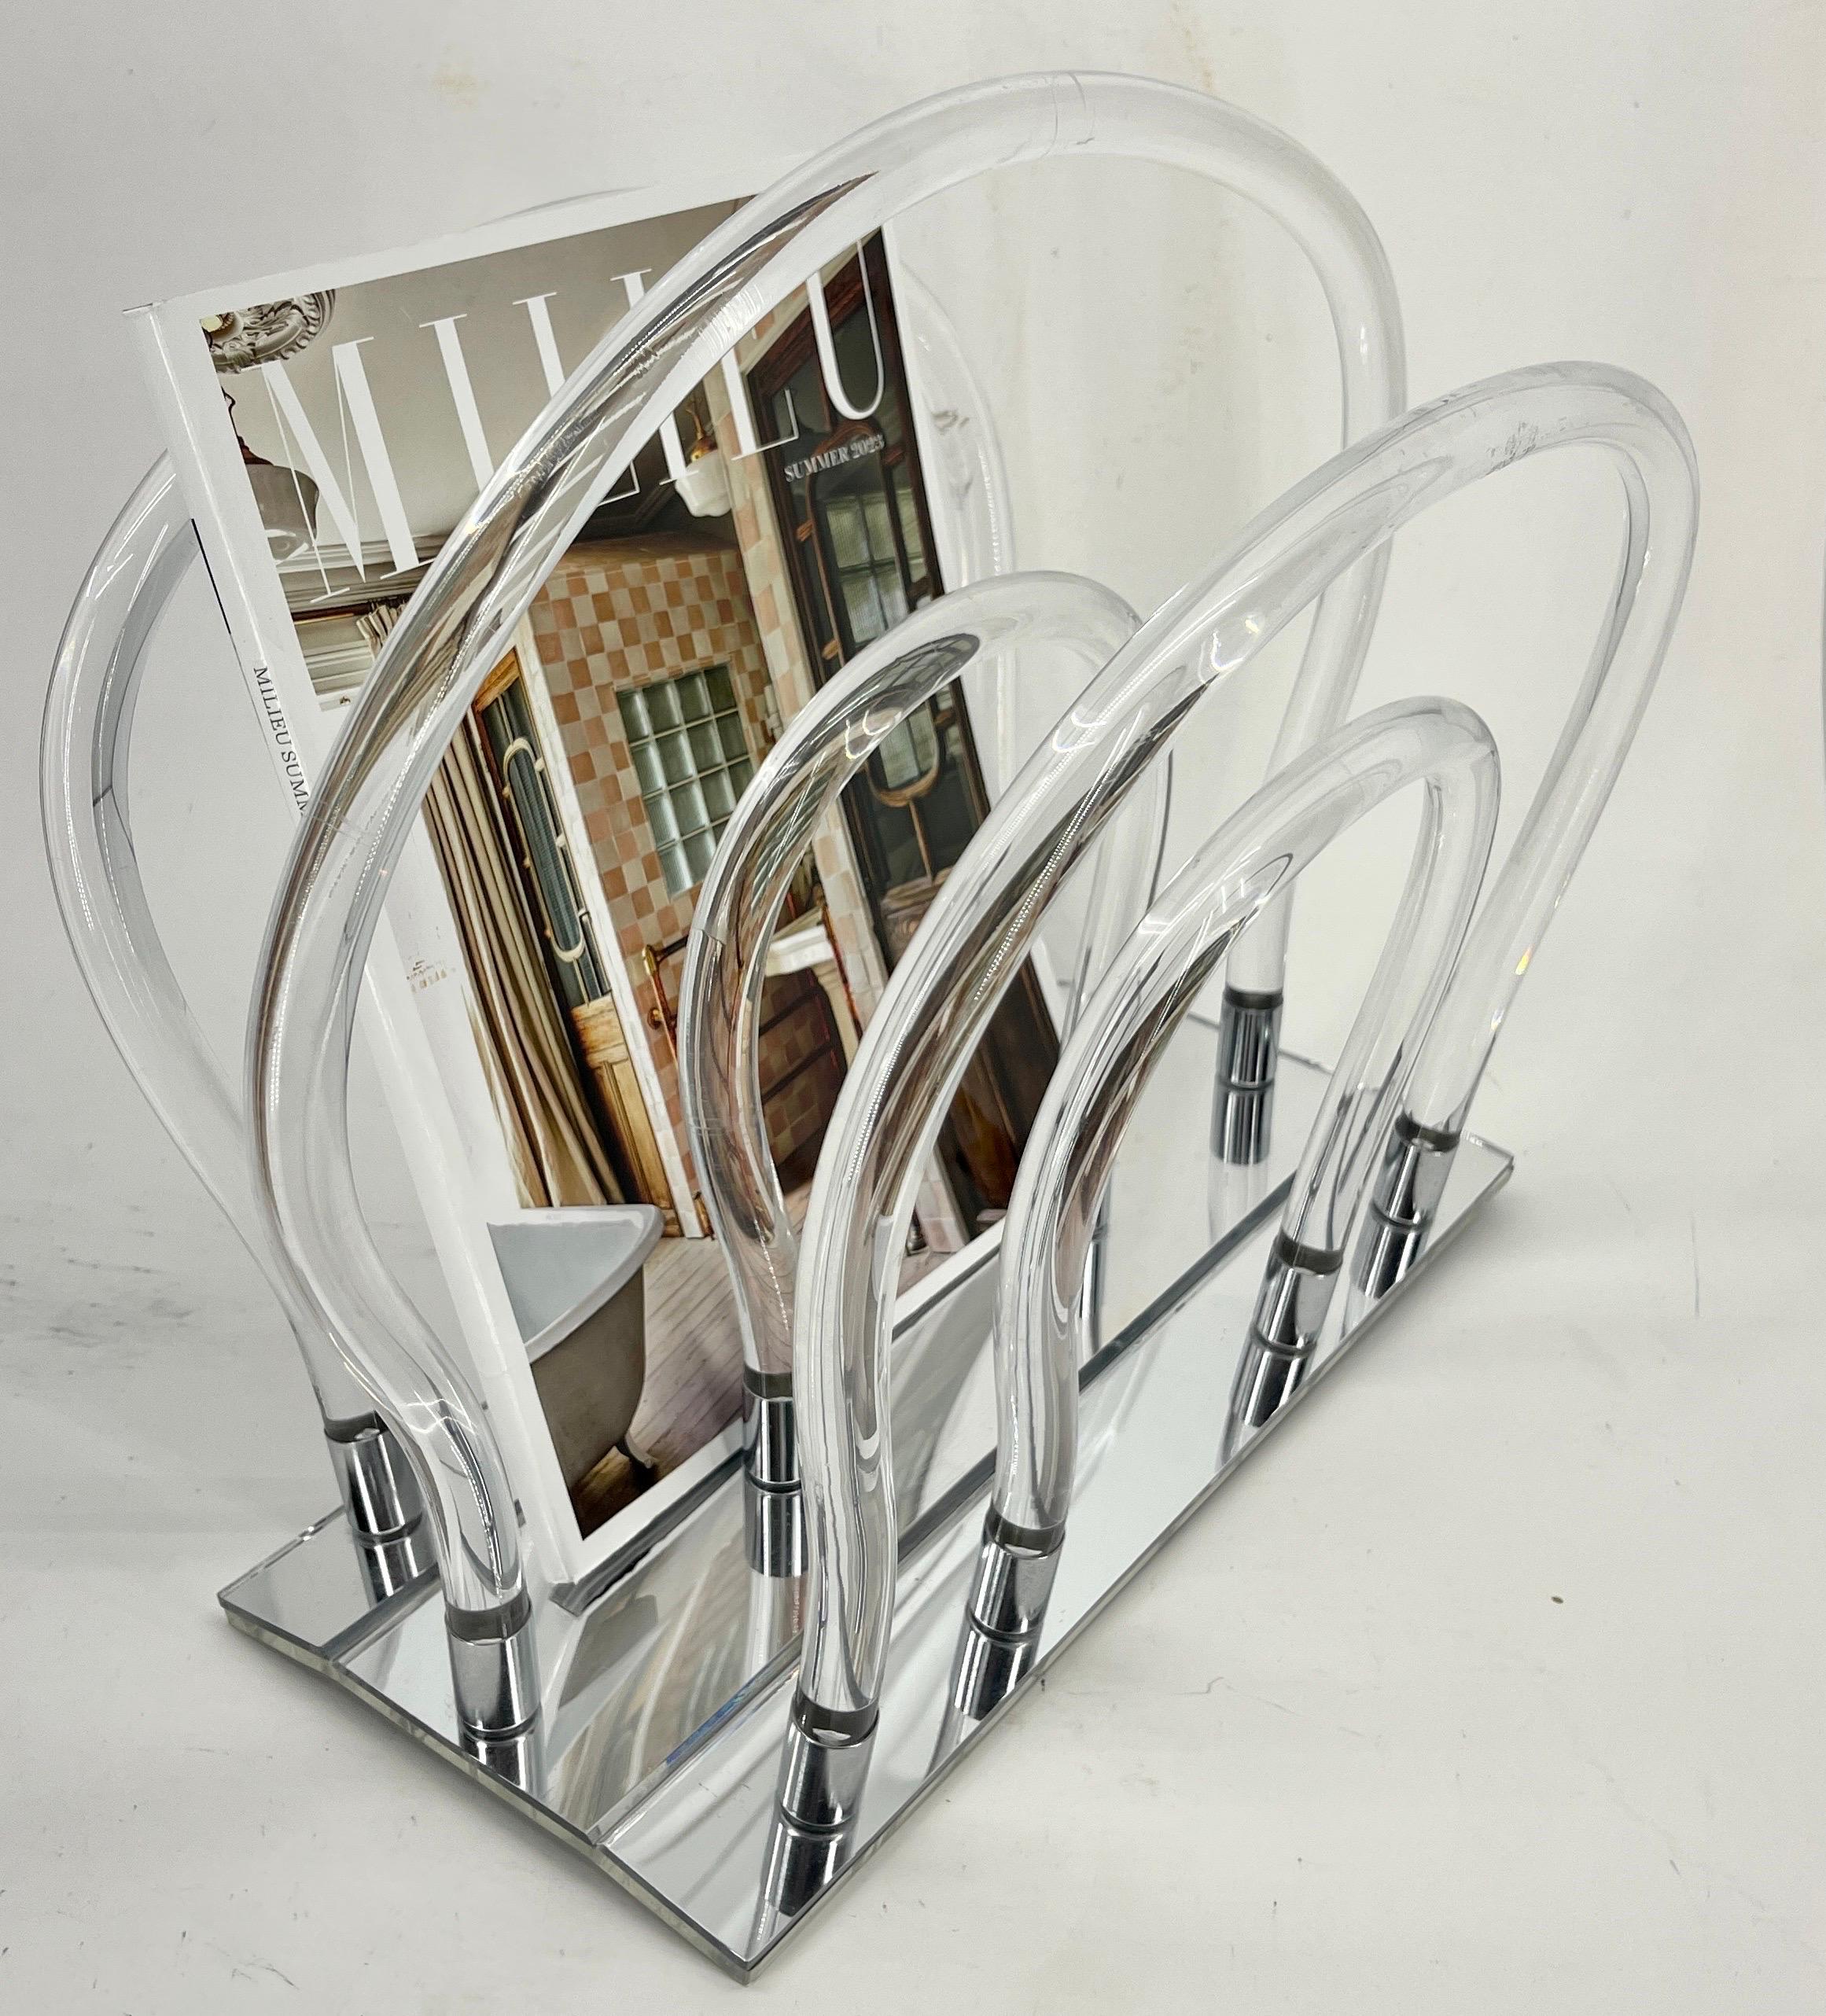 20th Century Hollywood Regency Lucite Magazine Rack by Dorothy Thorpe, 1970's American